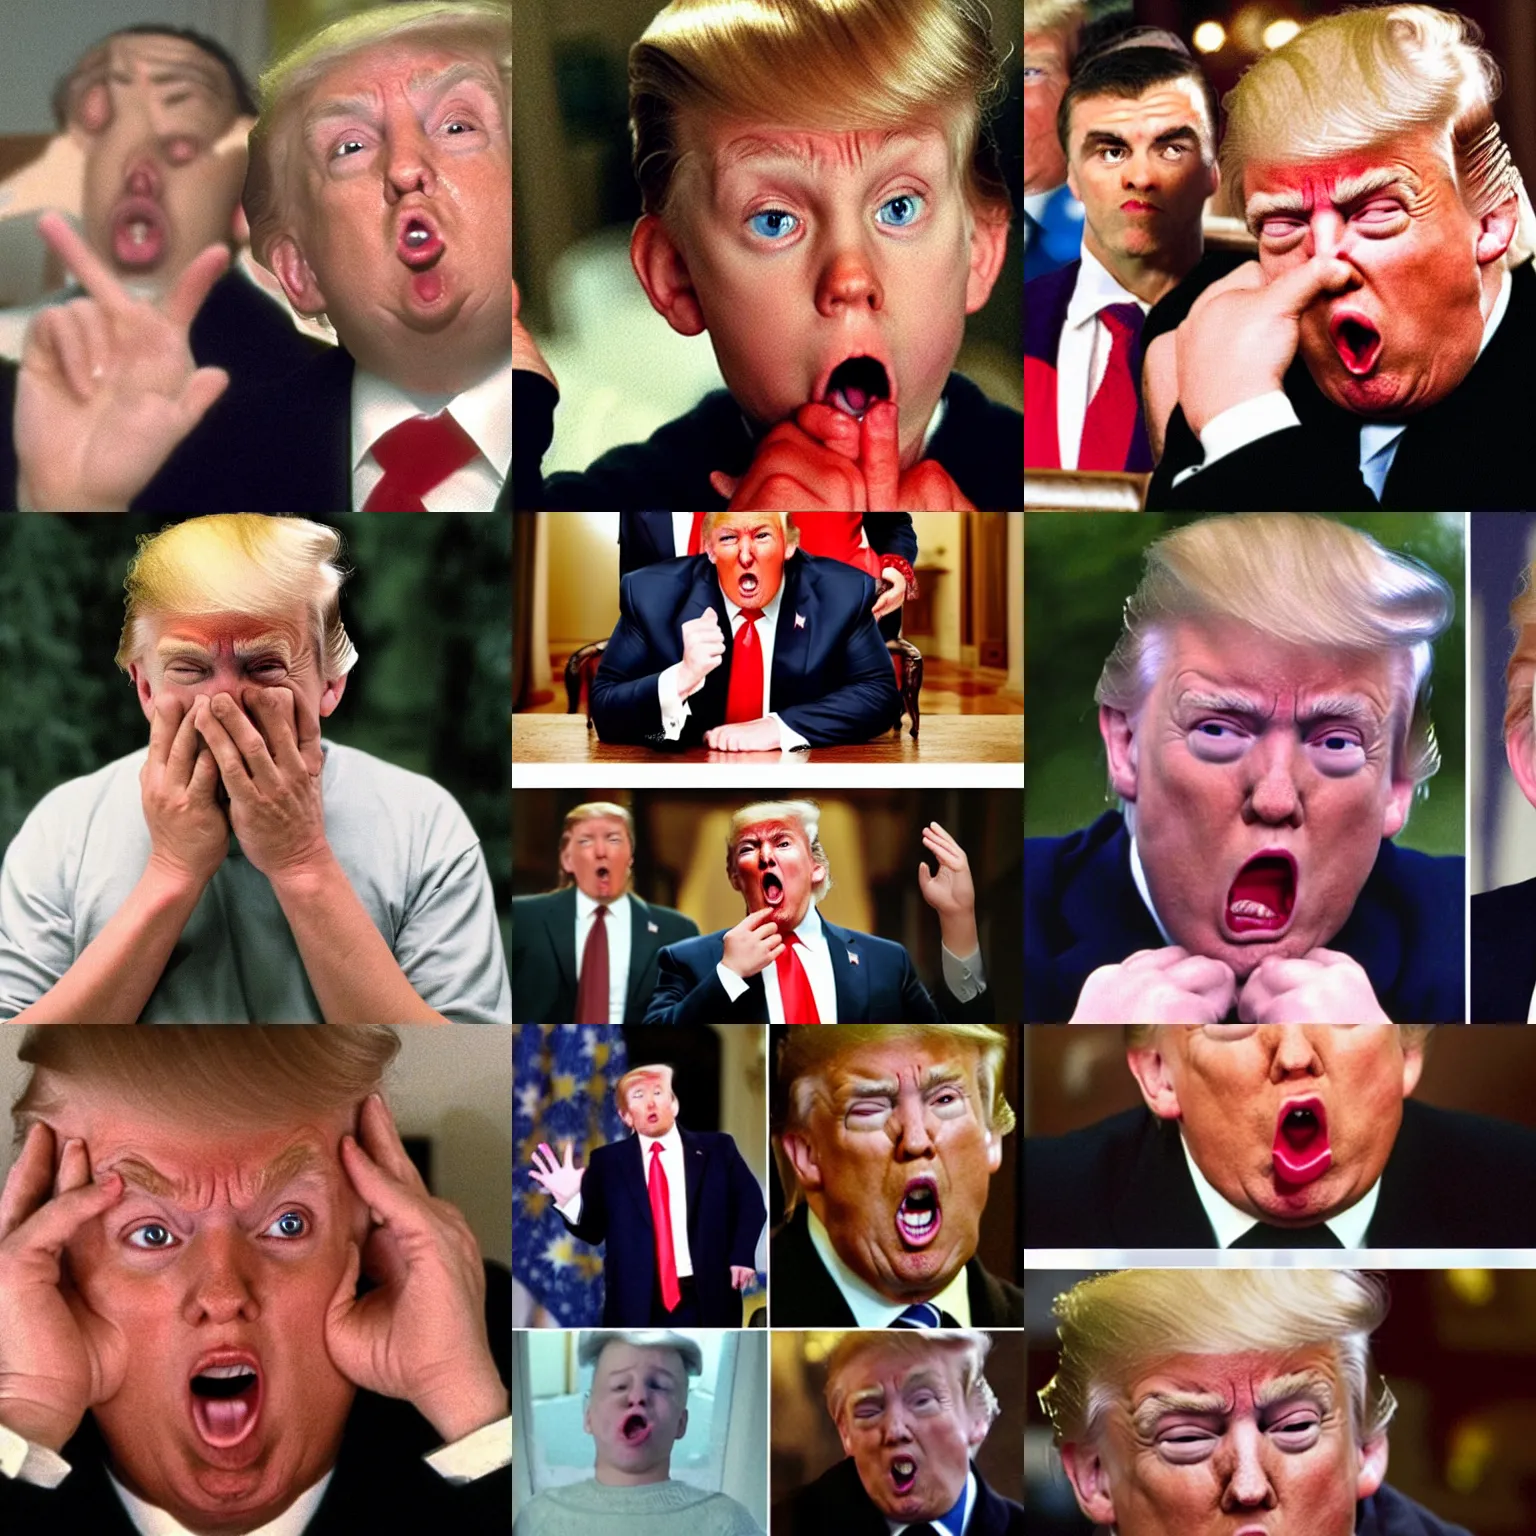 Prompt: trump with his mouth agape and his eyebrows raised and his hands on his cheeks like he's in shock. Suprised and scared expression. Kevin McAllister home alone pose. Hands on face open mouth.